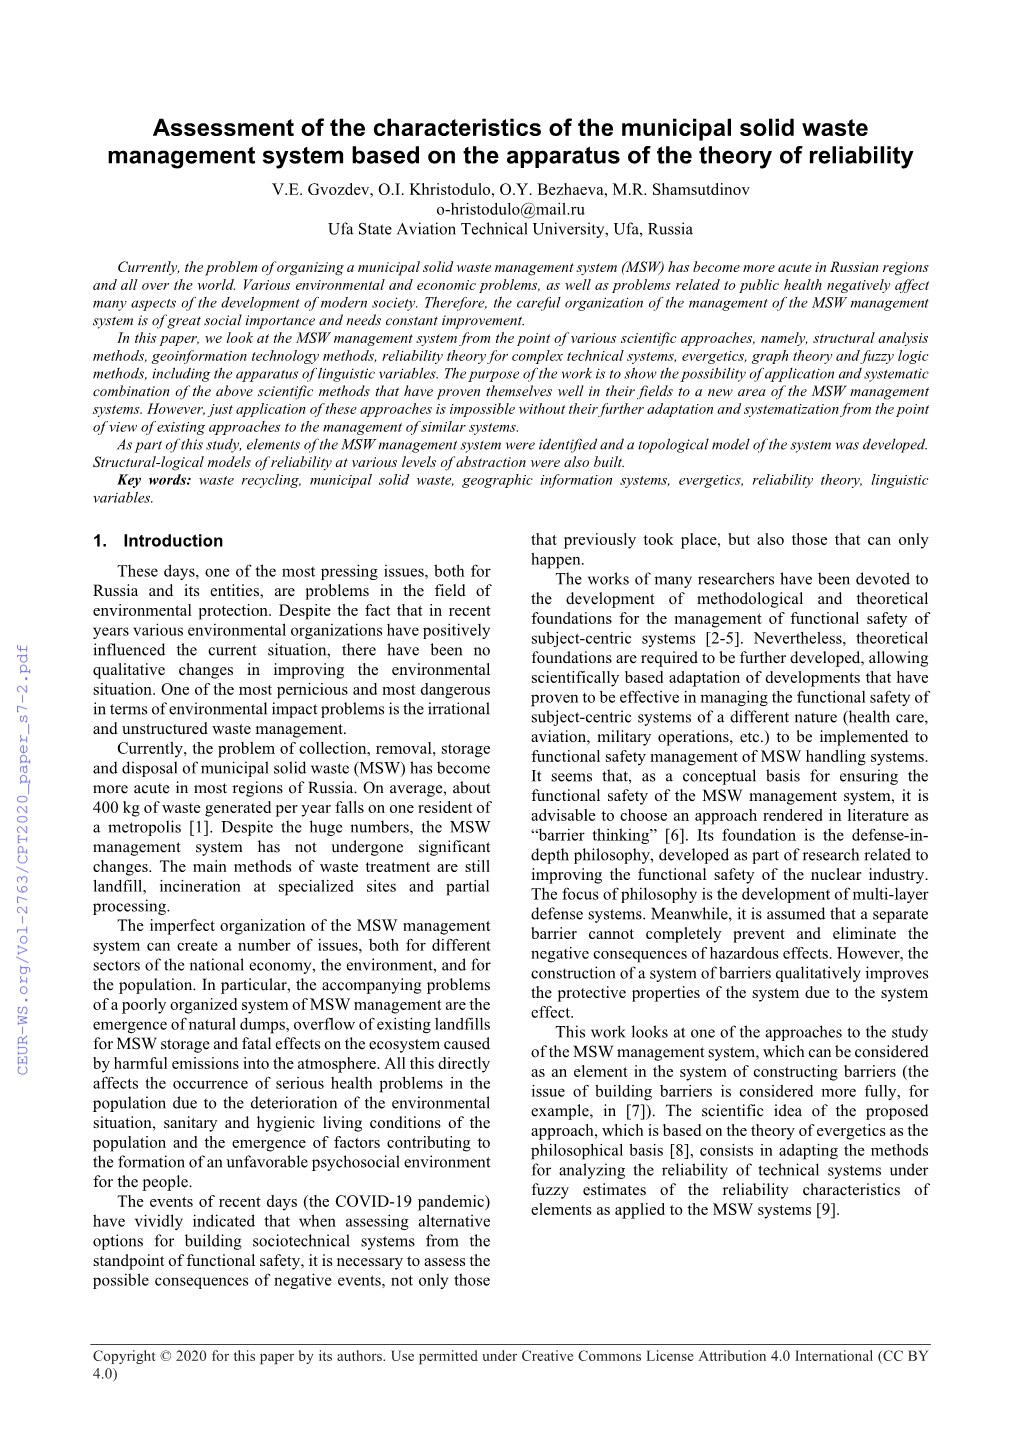 Assessment of the Characteristics of the Municipal Solid Waste Management System Based on the Apparatus of the Theory of Reliability V.E